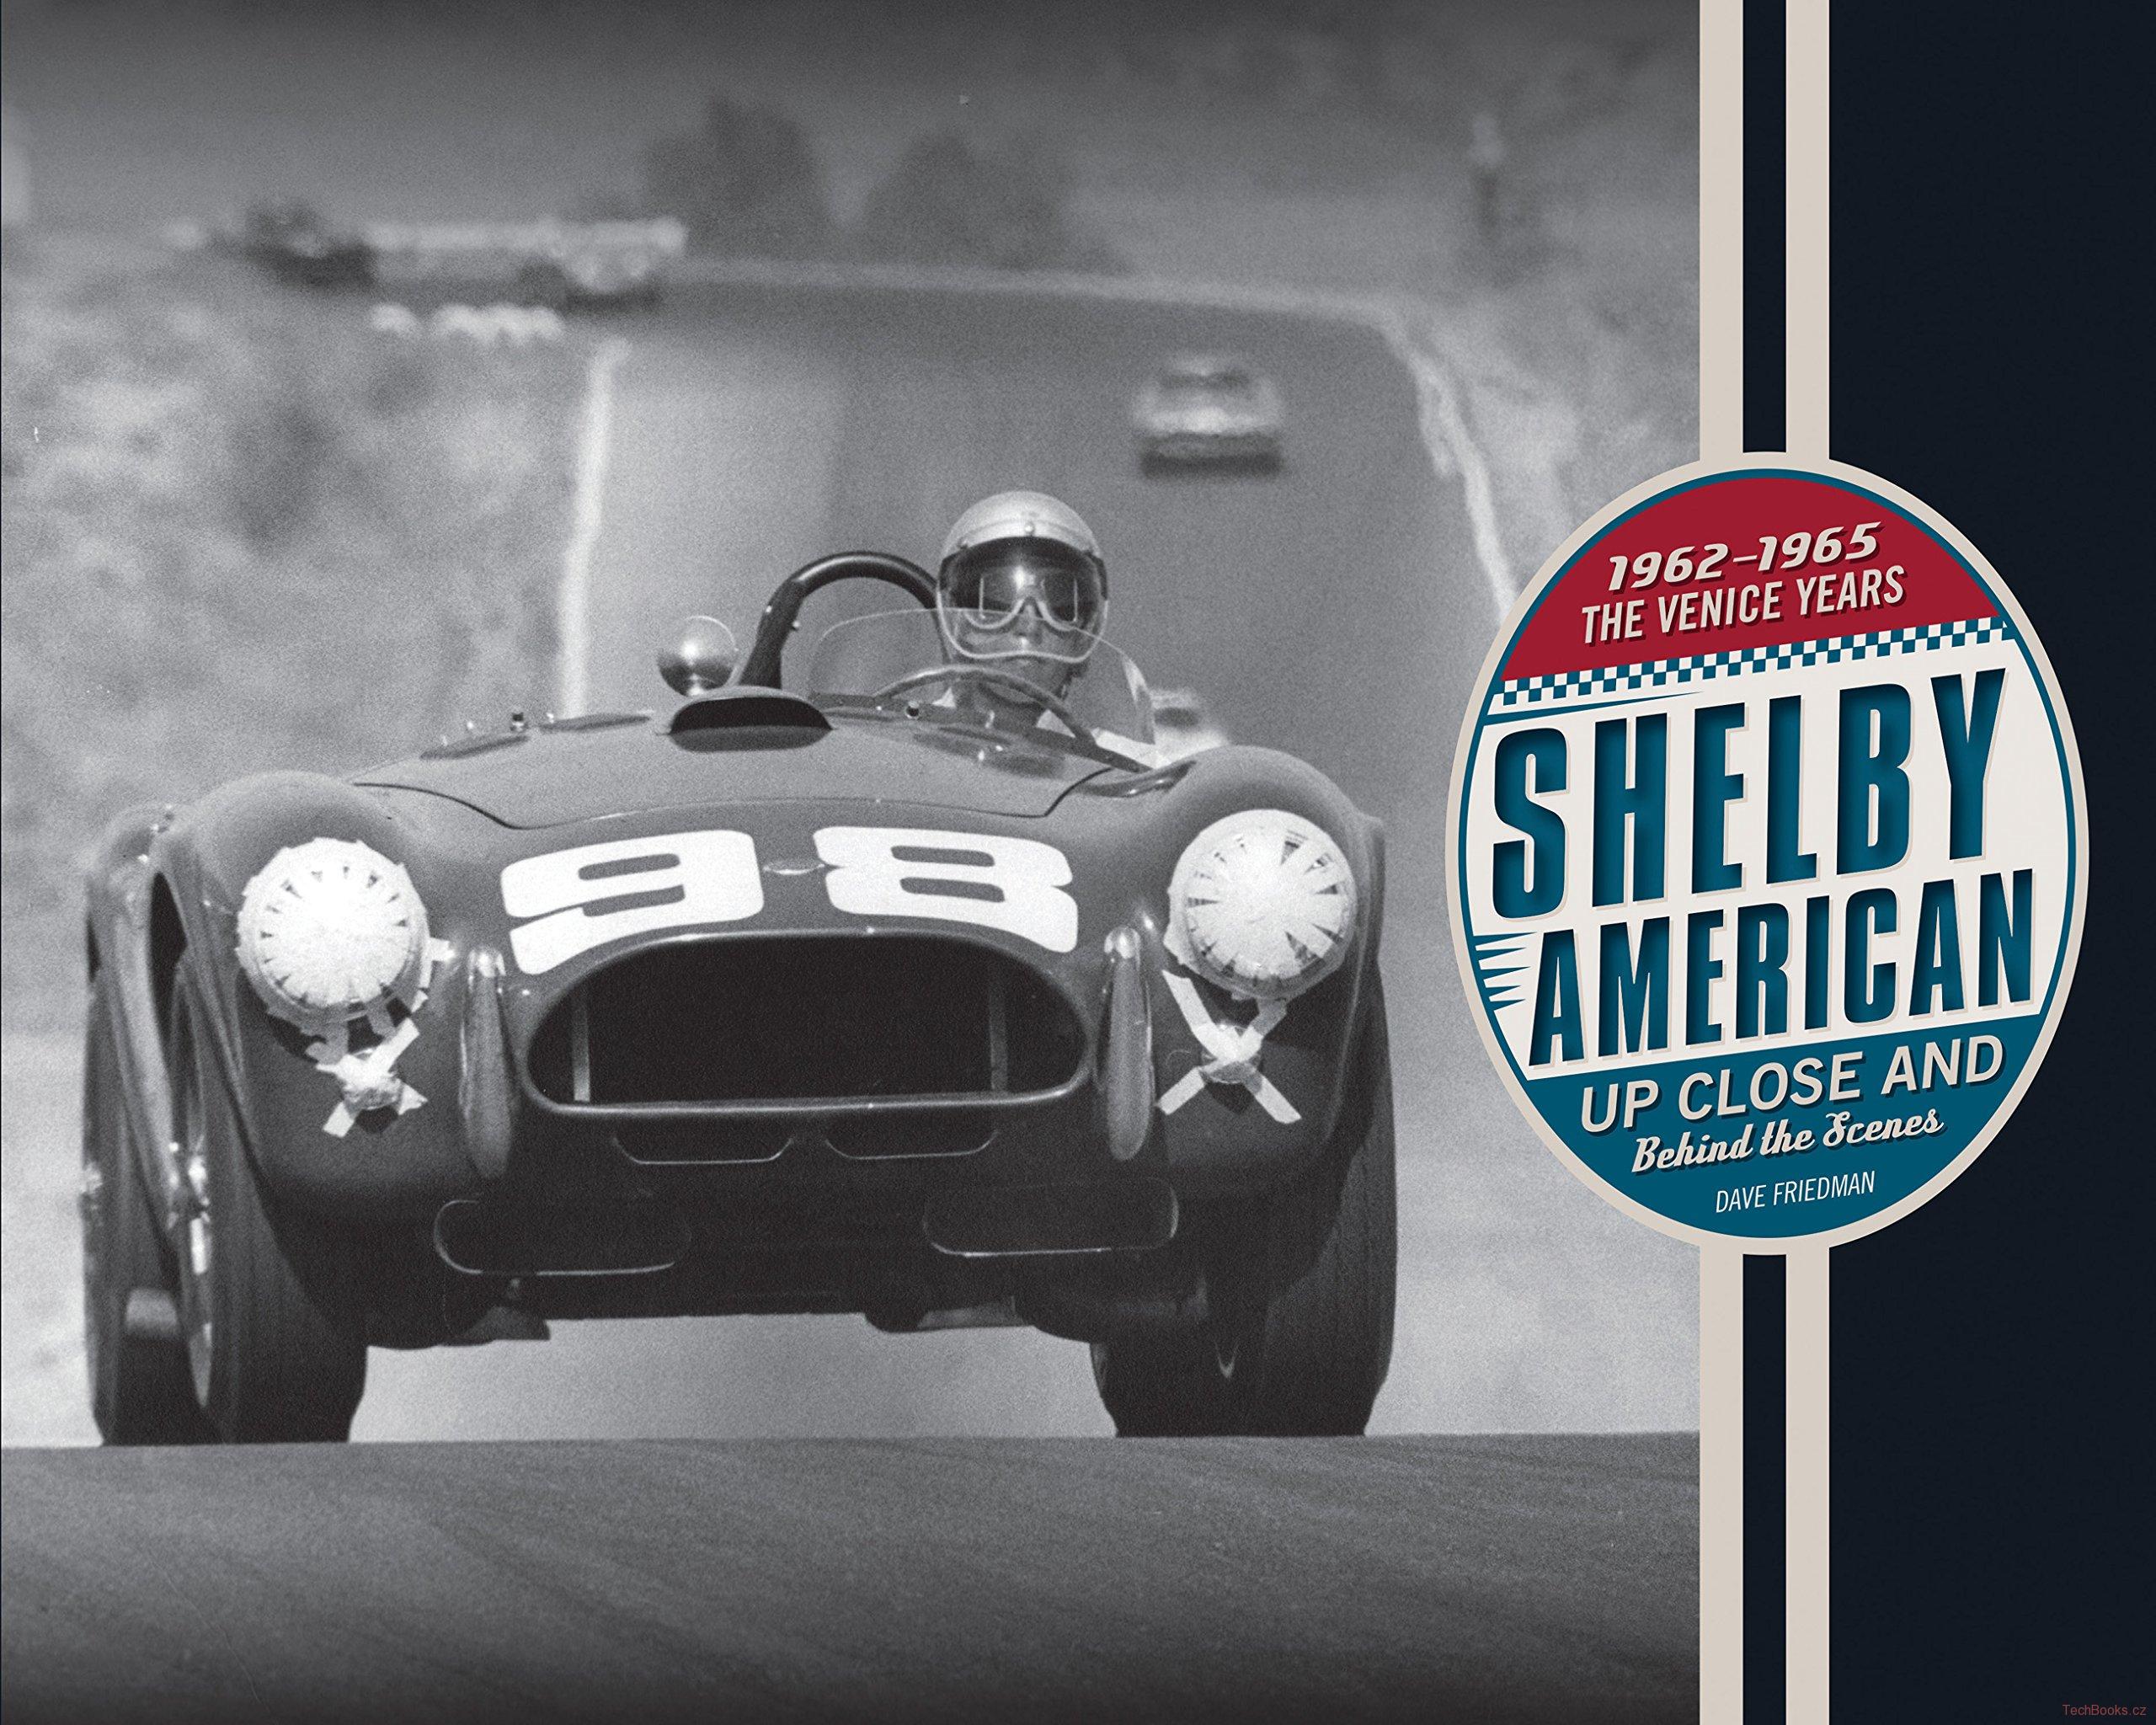 Shelby American: Up Close and Behind the Scenes